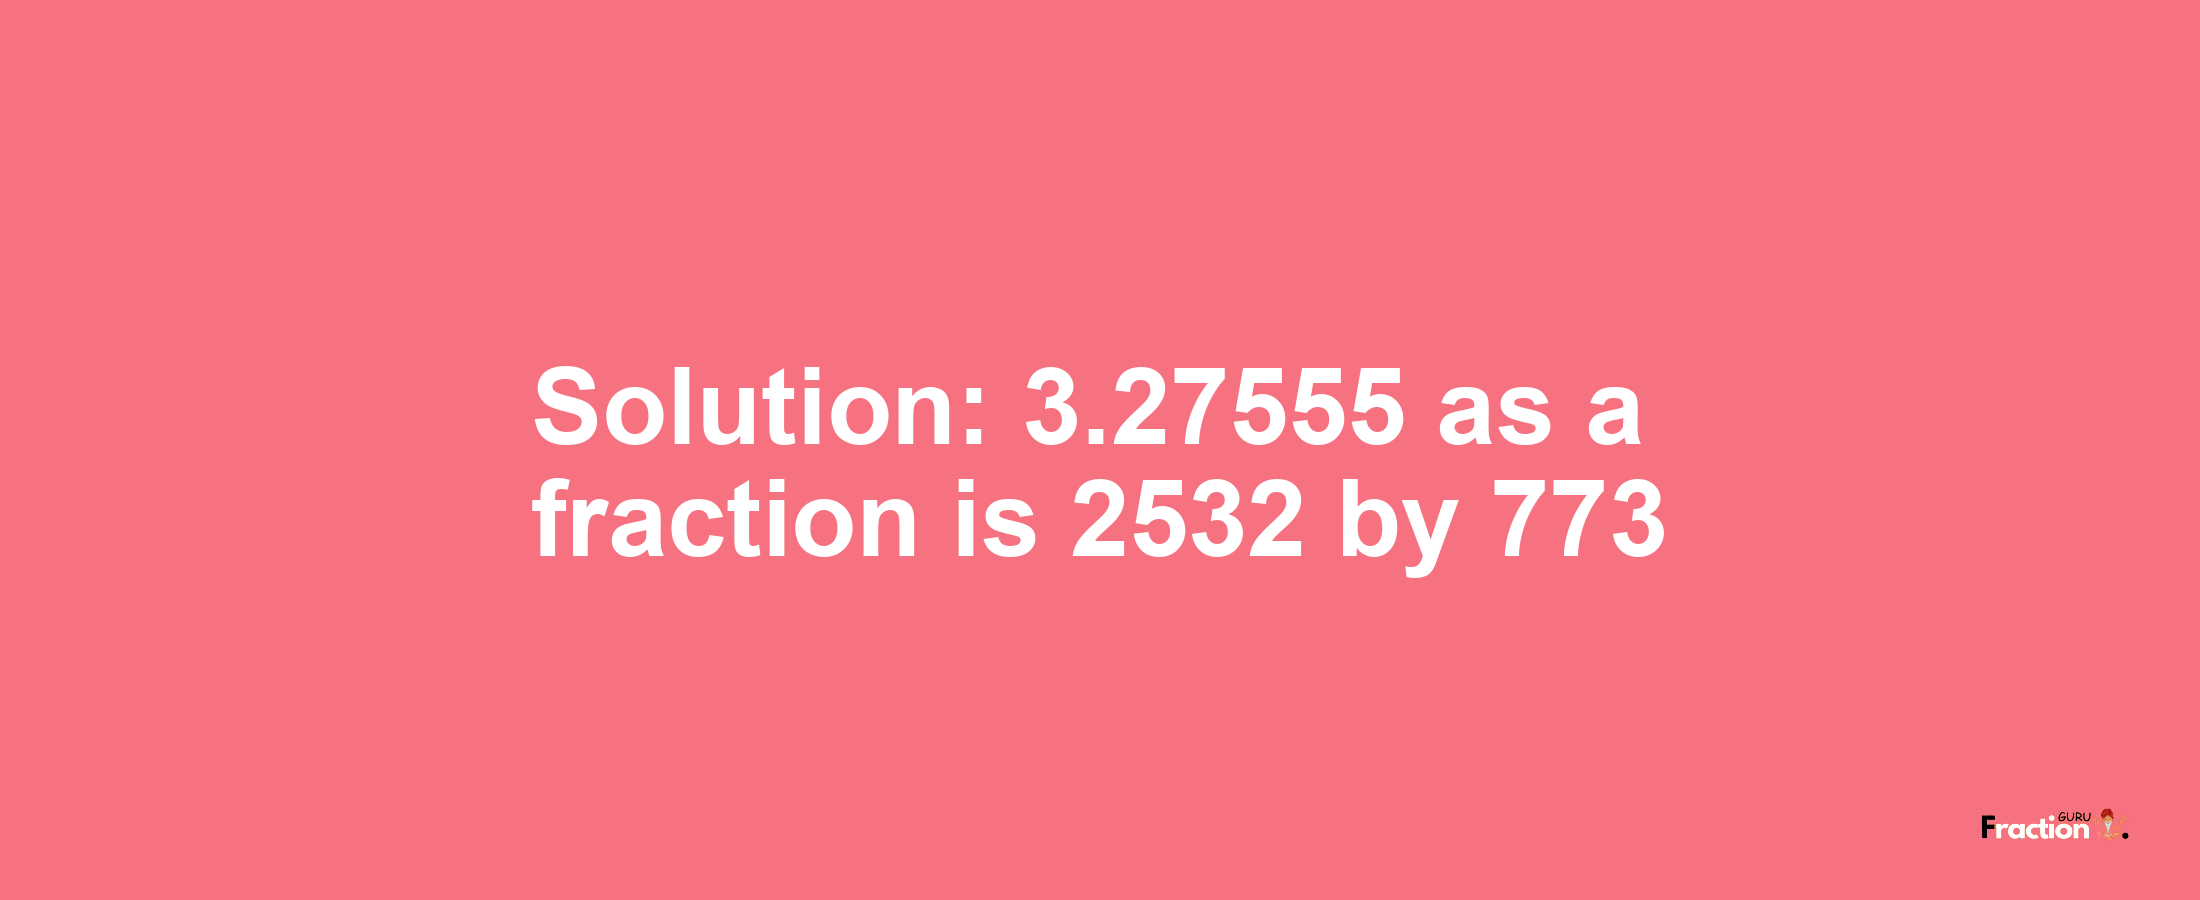 Solution:3.27555 as a fraction is 2532/773